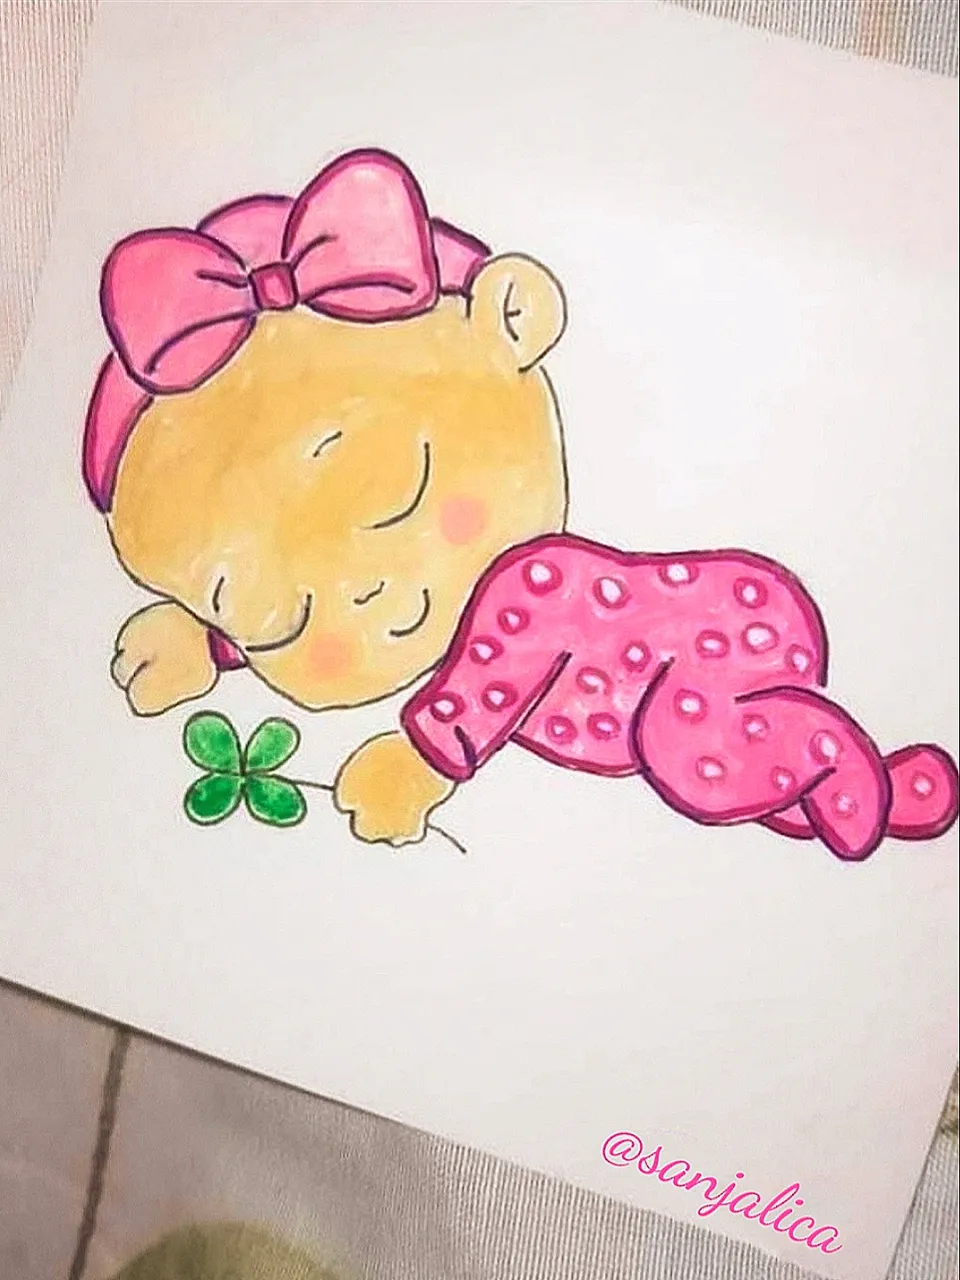 Baby drawing | Easy baby drawing step by step | how to draw a baby - YouTube